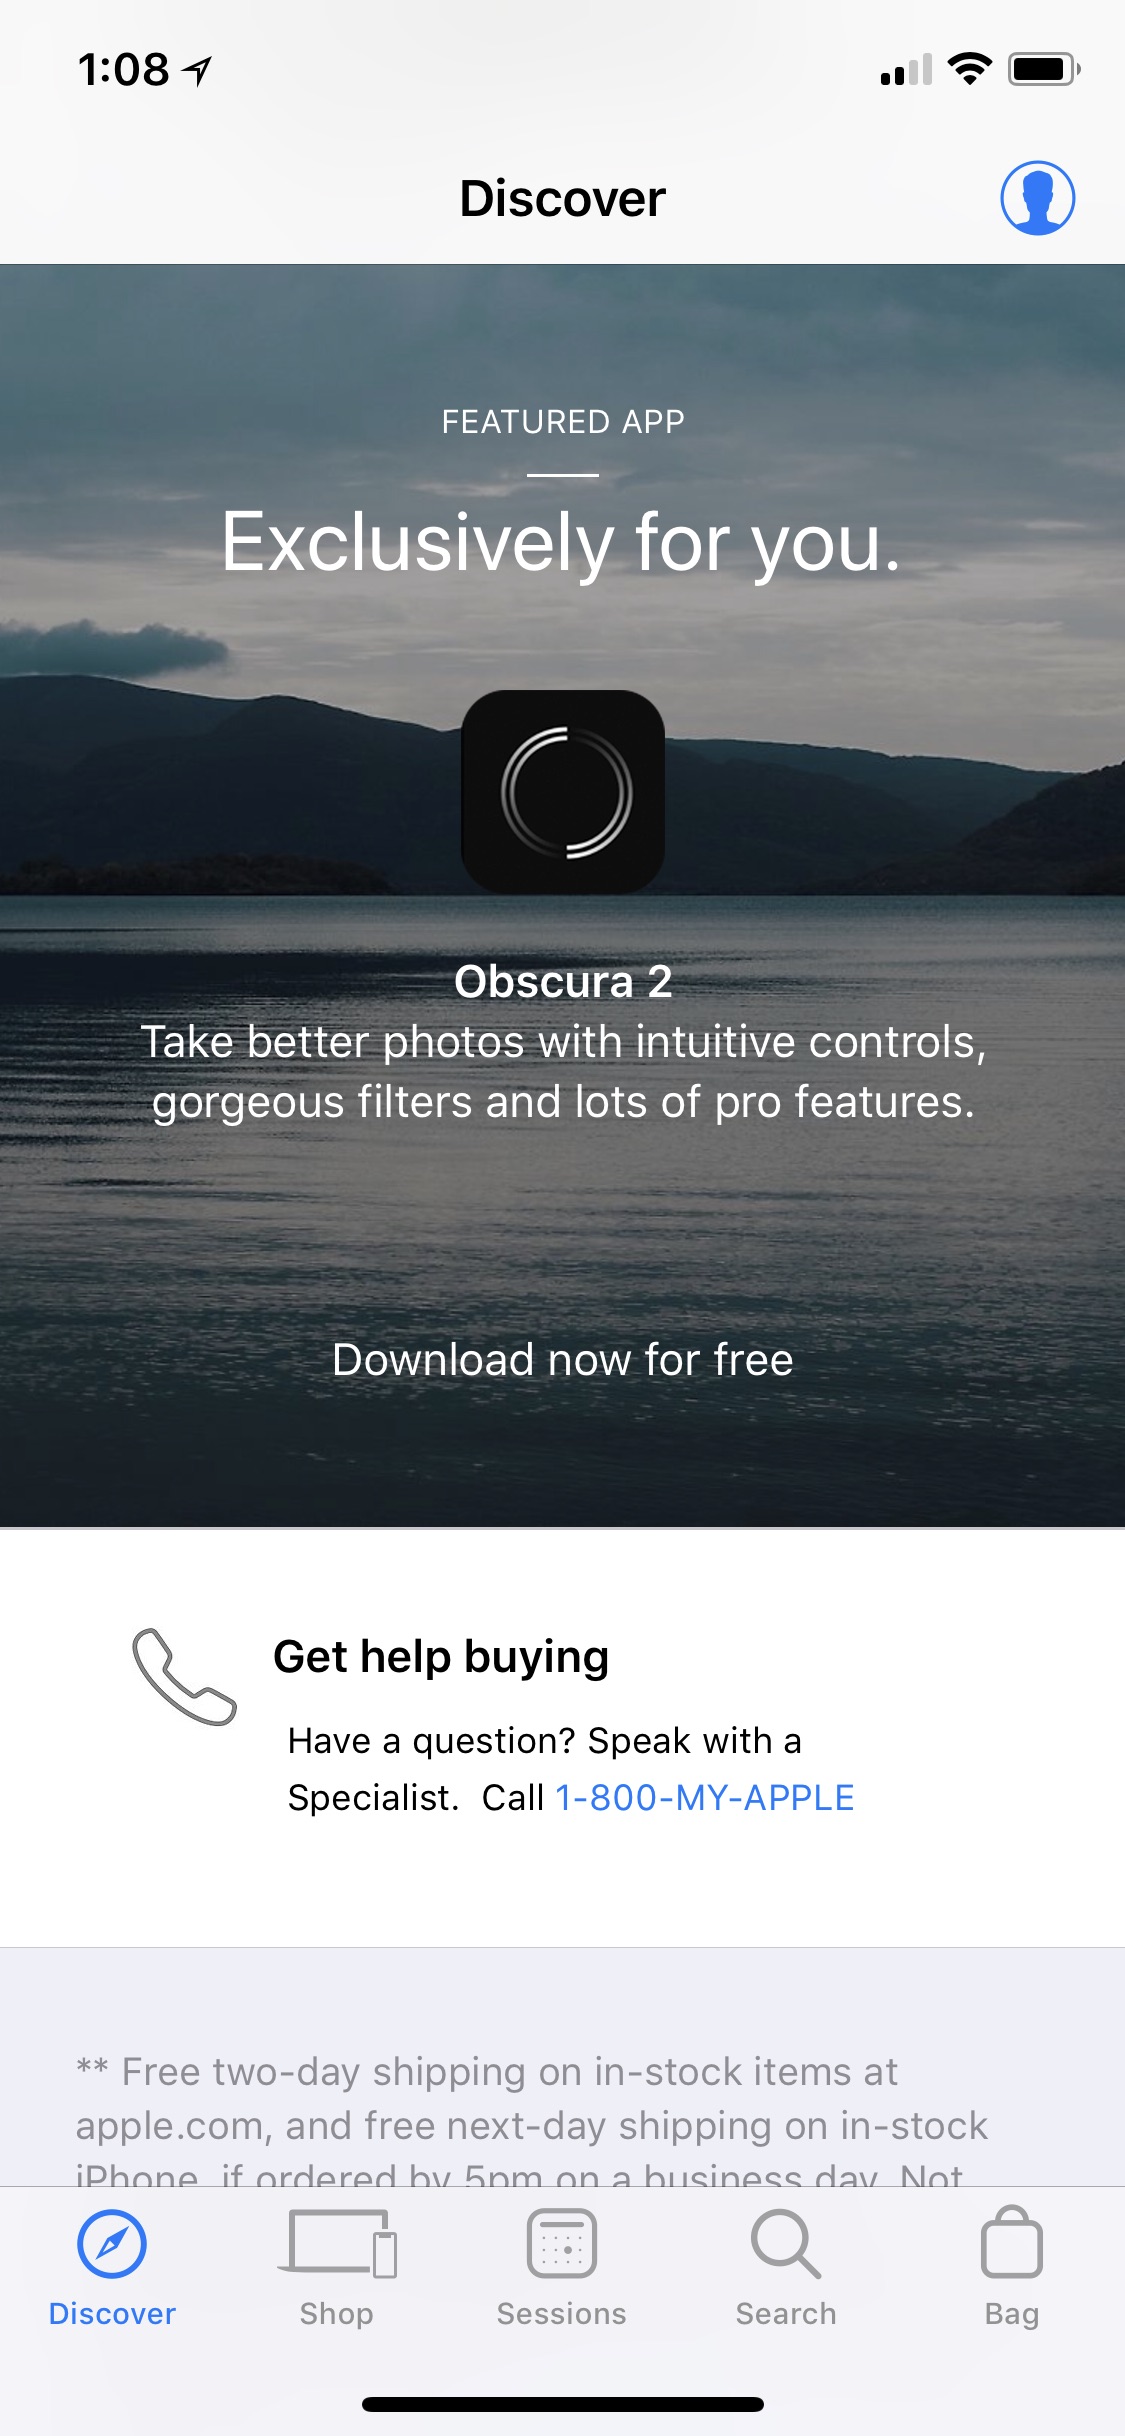 Apple Offers 'Obscura 2' Camera App as a Free Download!